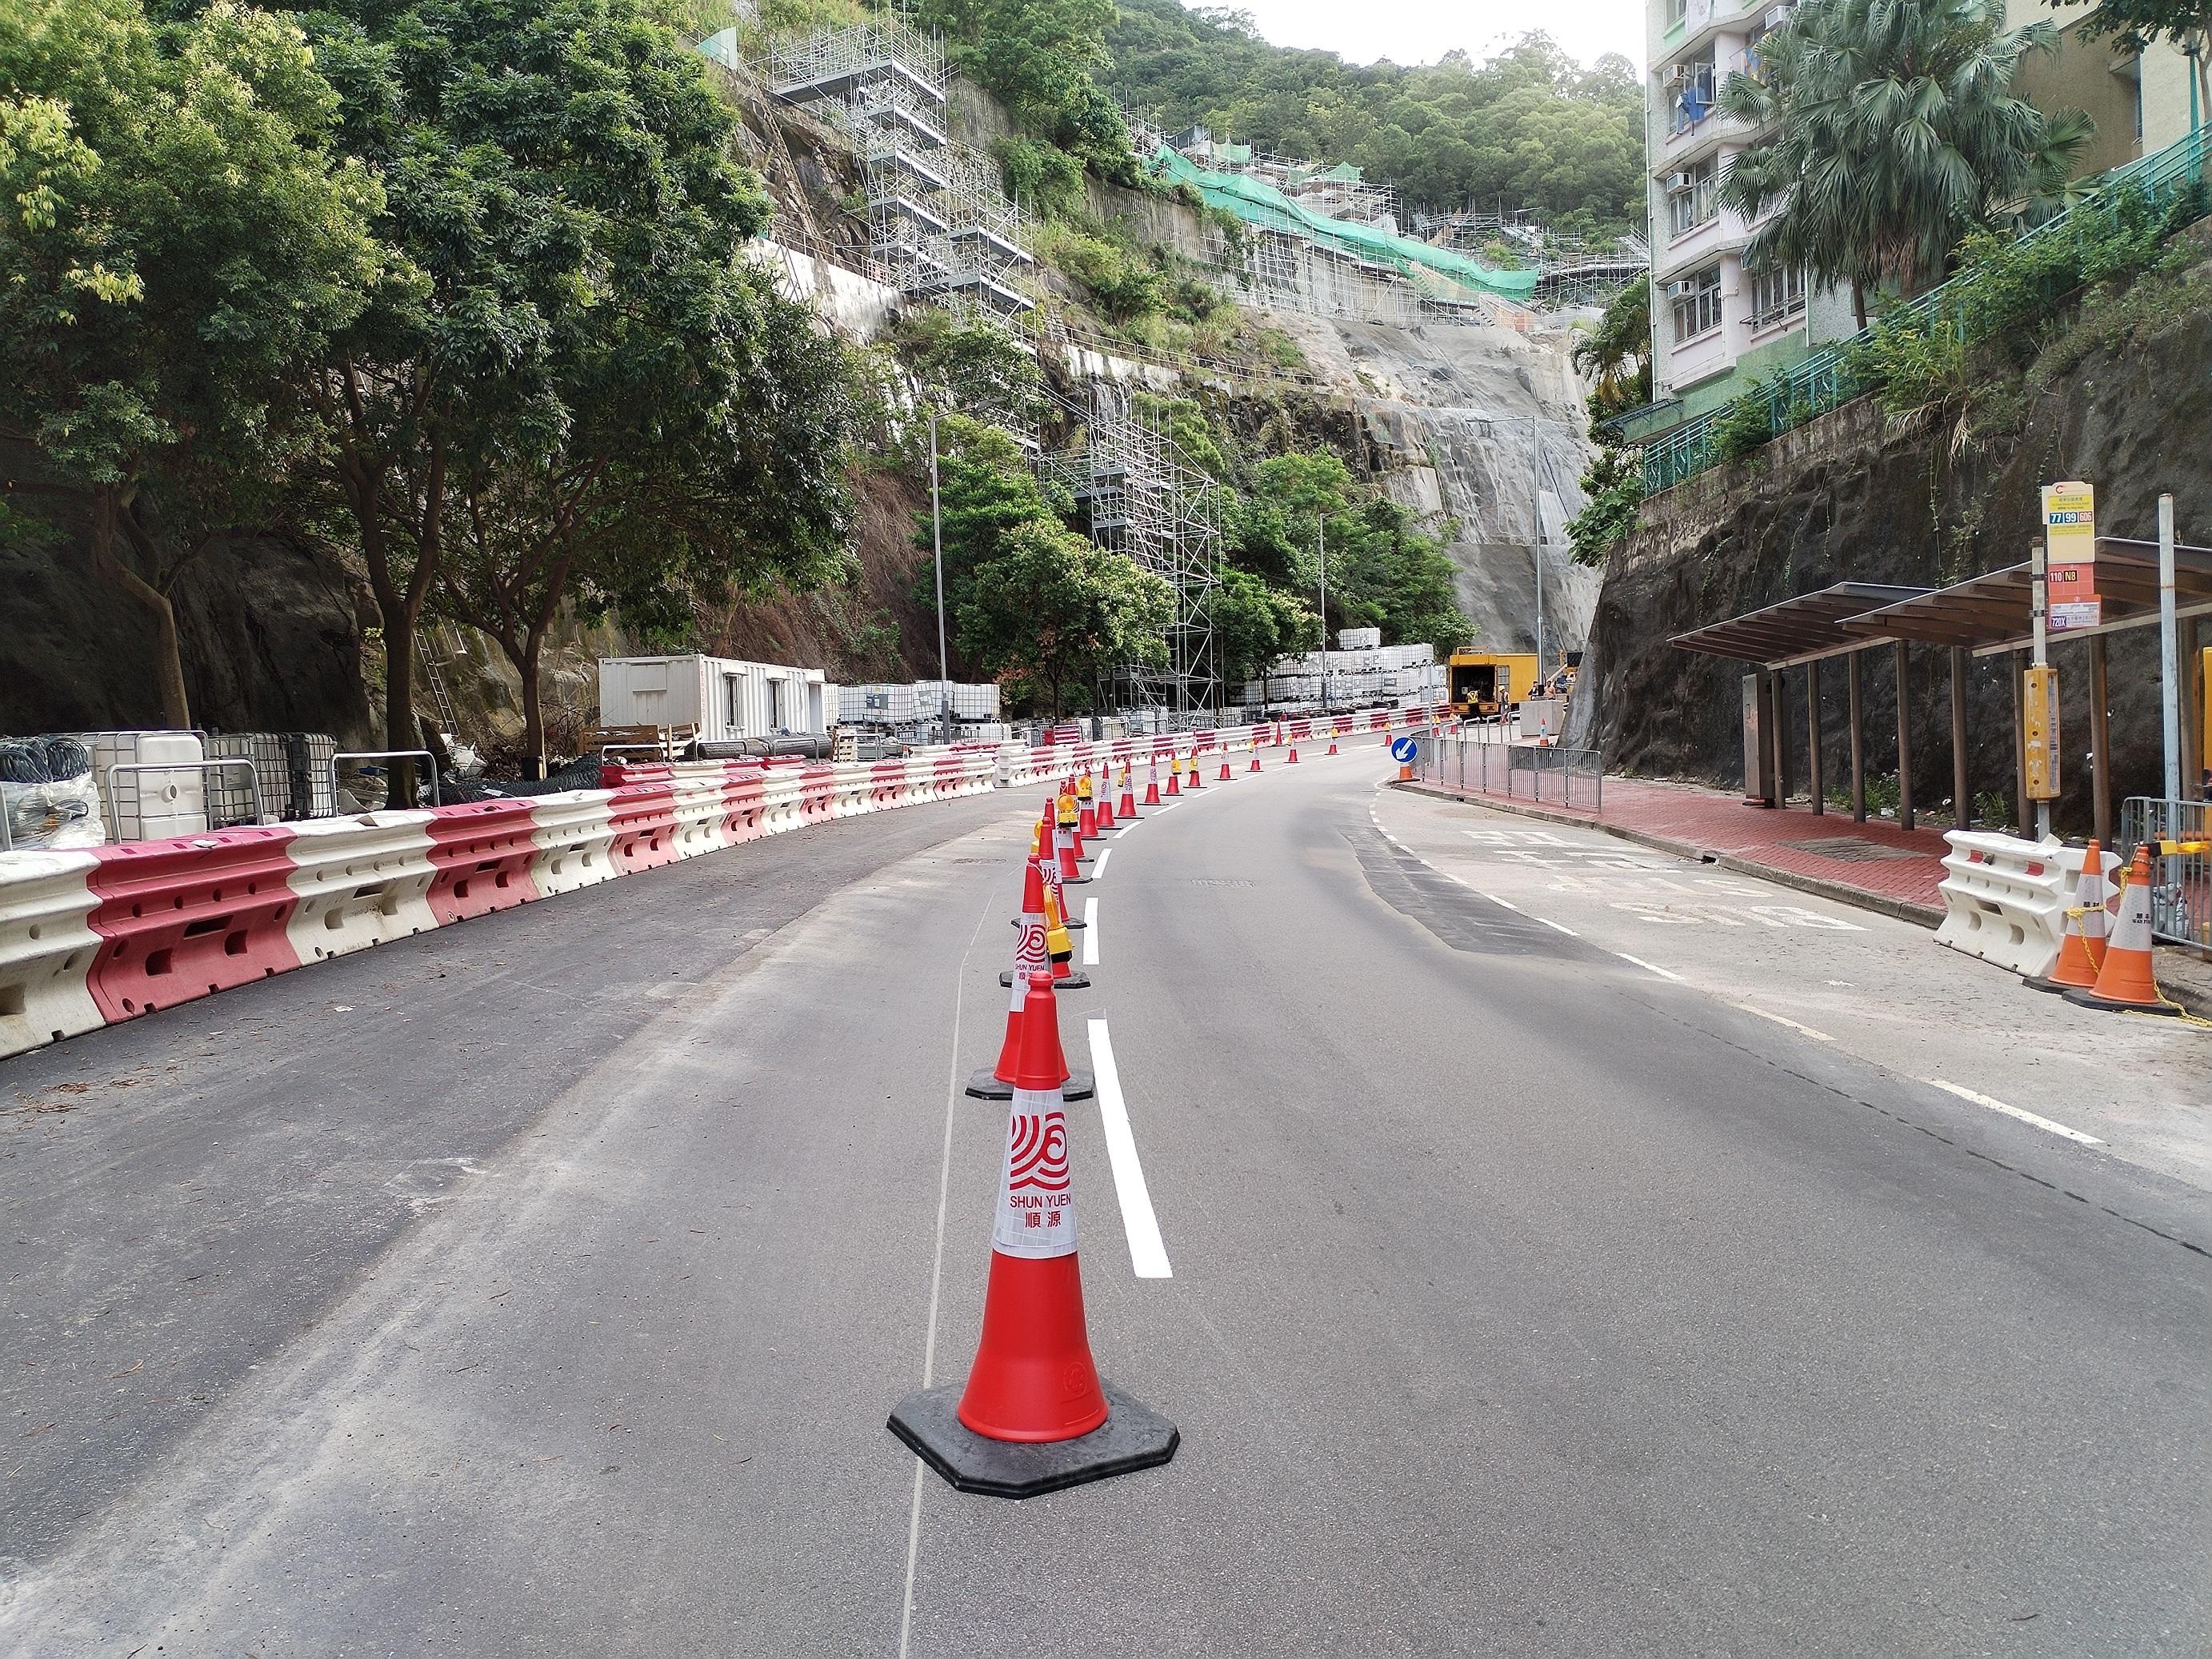 The Highways Department today (June 28) announced that Yiu Hing Road will fully resume traffic on June 30 (Sunday). Photo shows the relevant section of Yiu Hing Road with road reinstatement works completed.